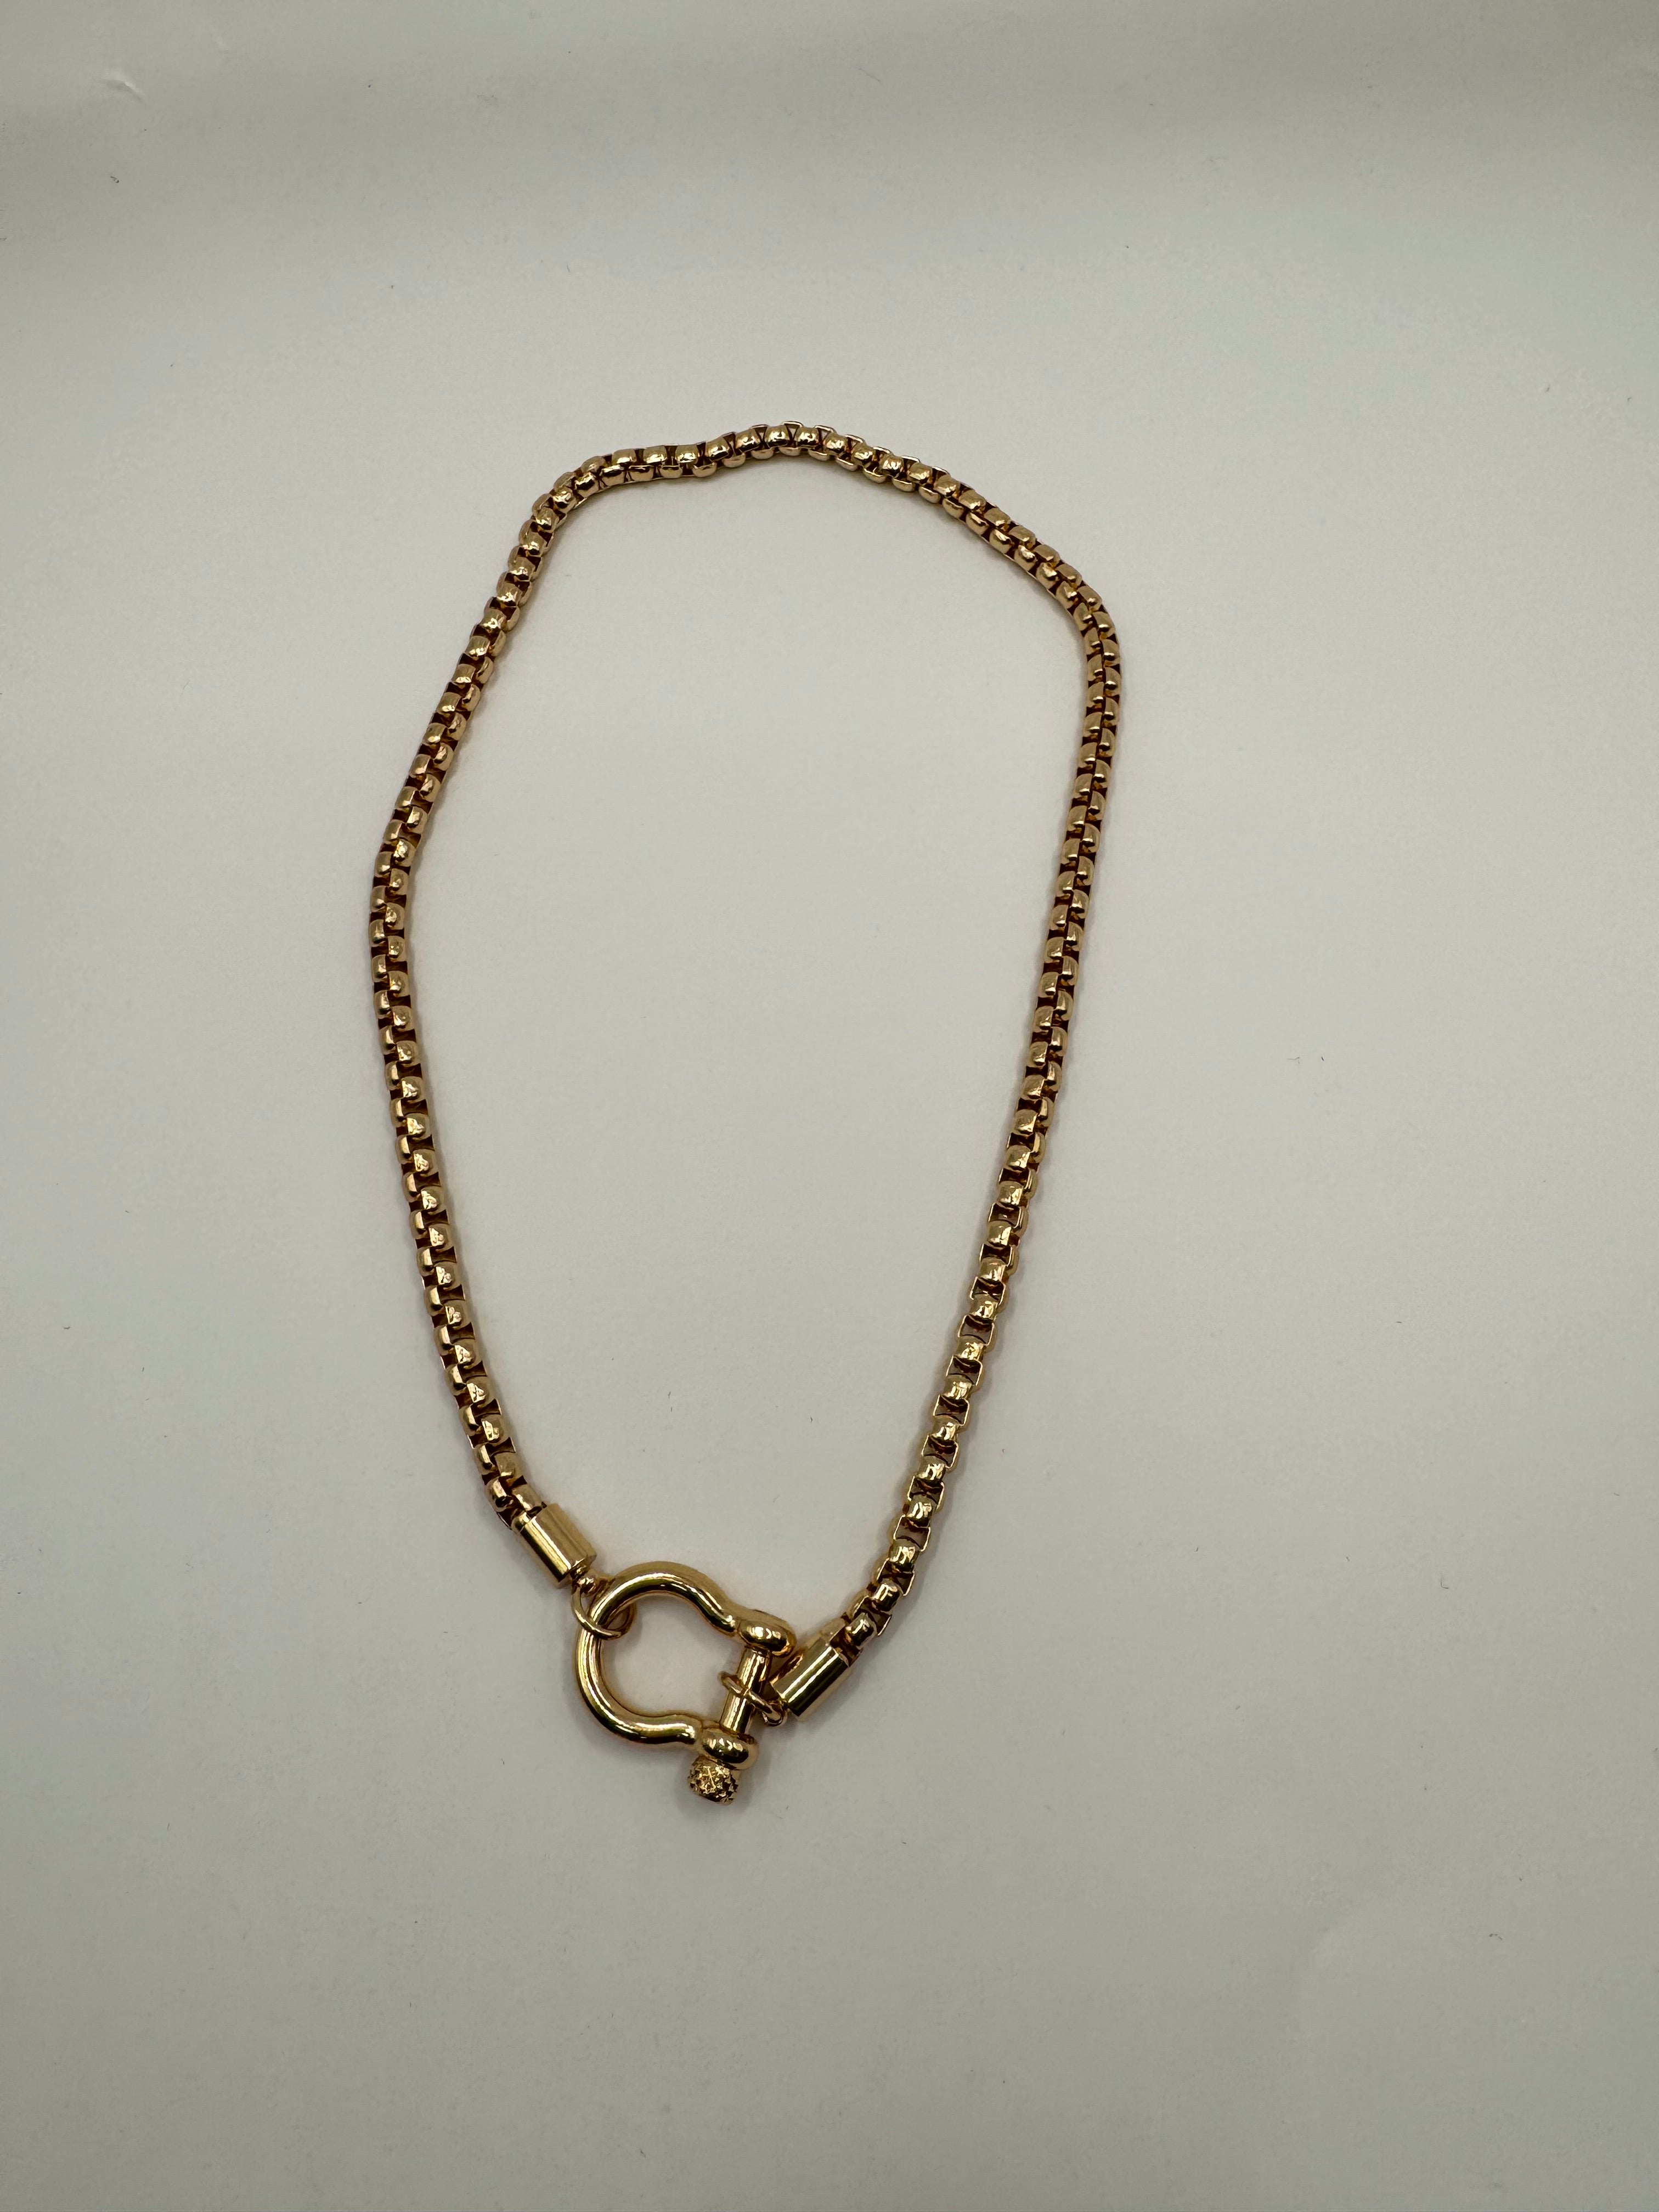 Horseshoe Necklace (Silver and Gold)